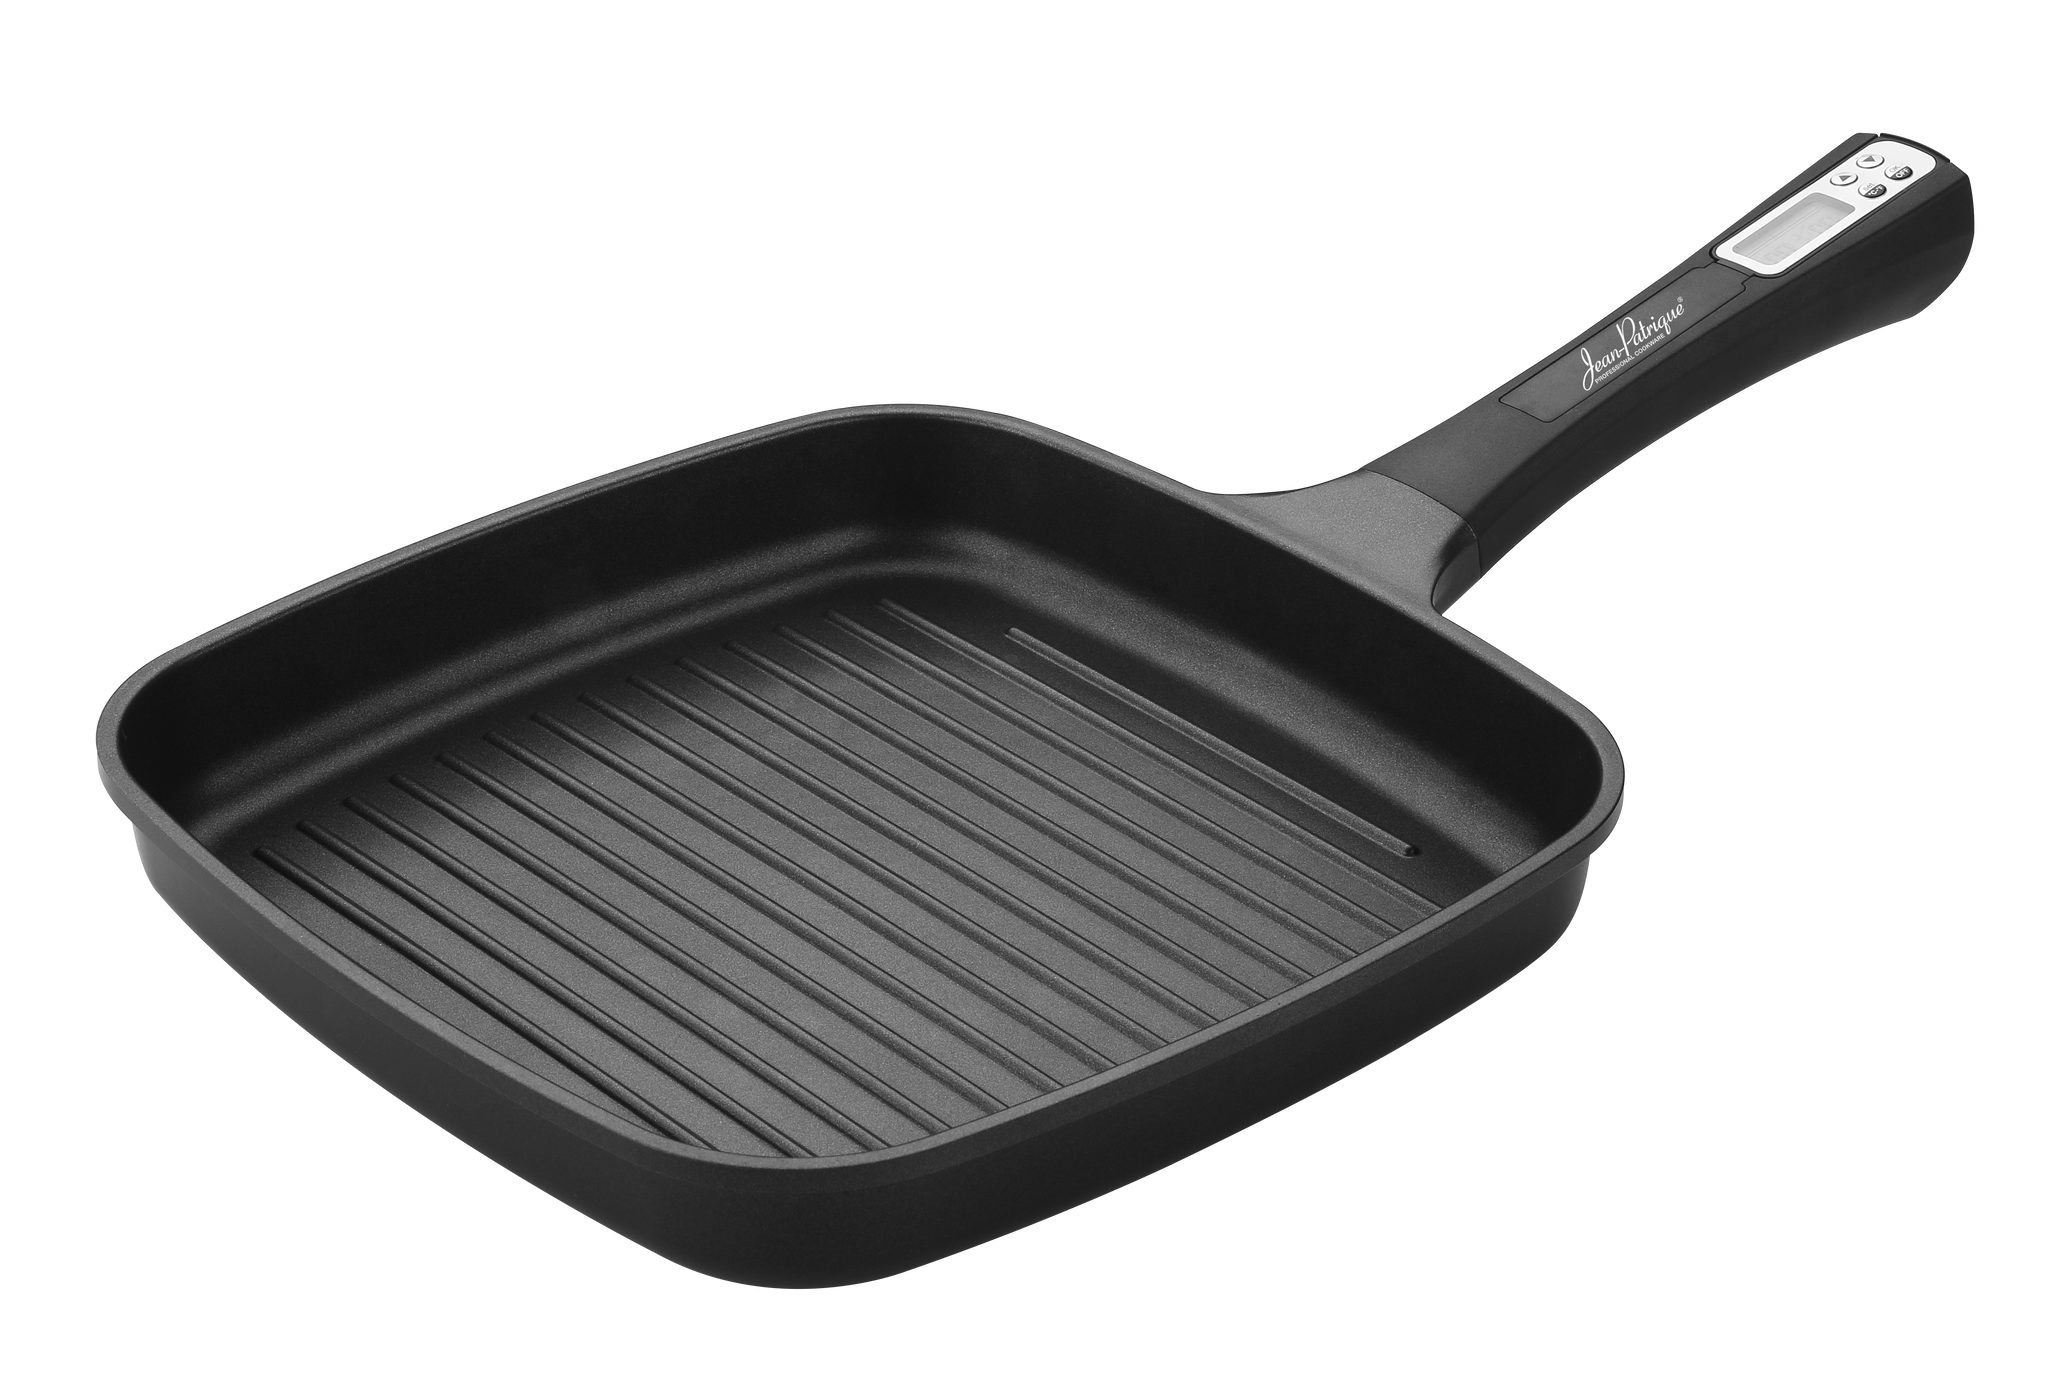 Jean Patrique The Meat Master - Smart Griddle Pan with Built-in Thermometer